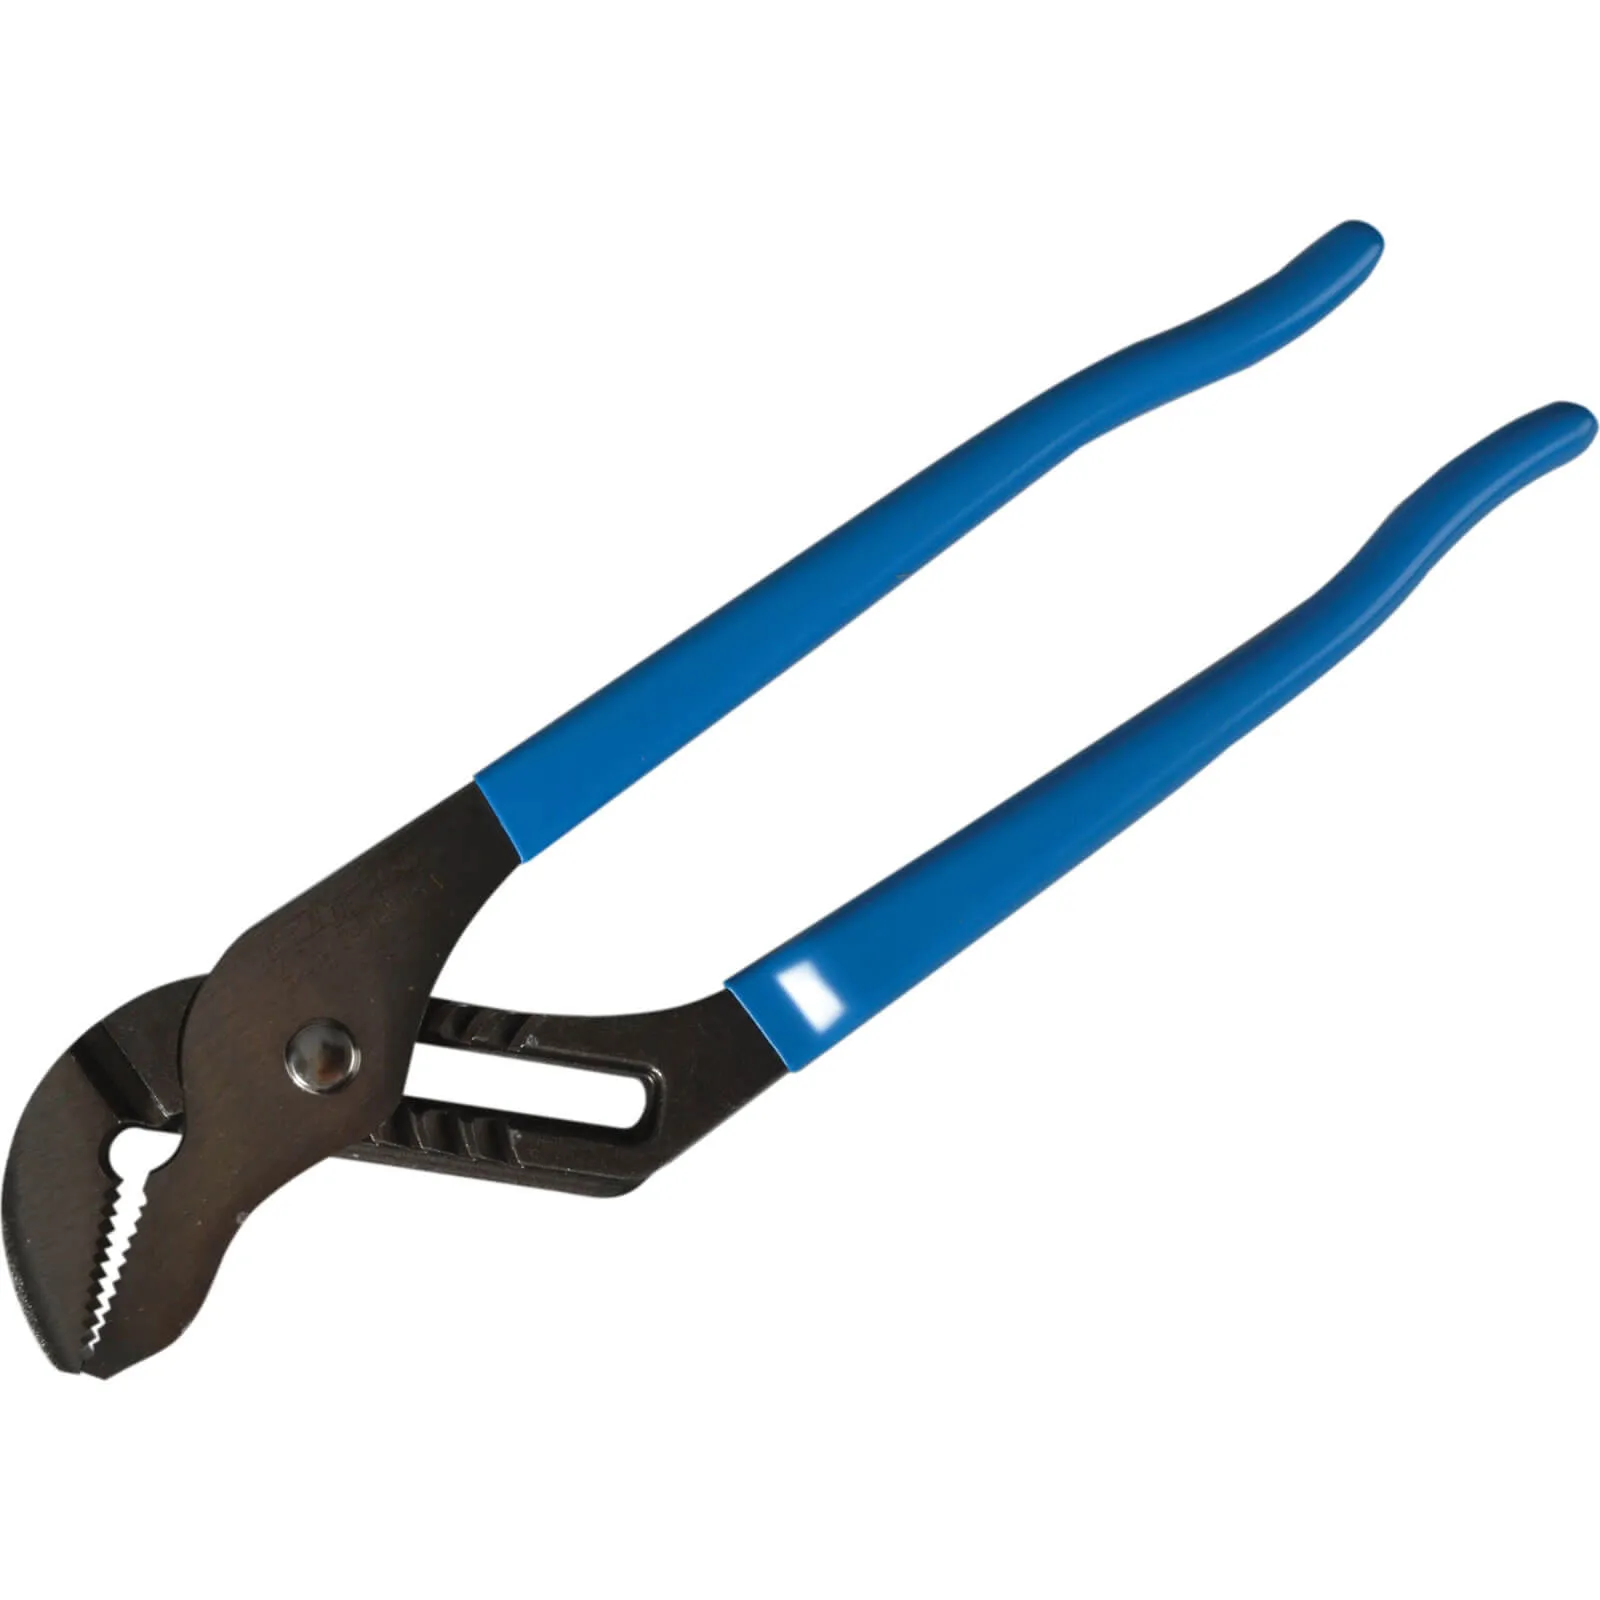 Channellock Straight Jaw Water Pump Pliers - 250mm